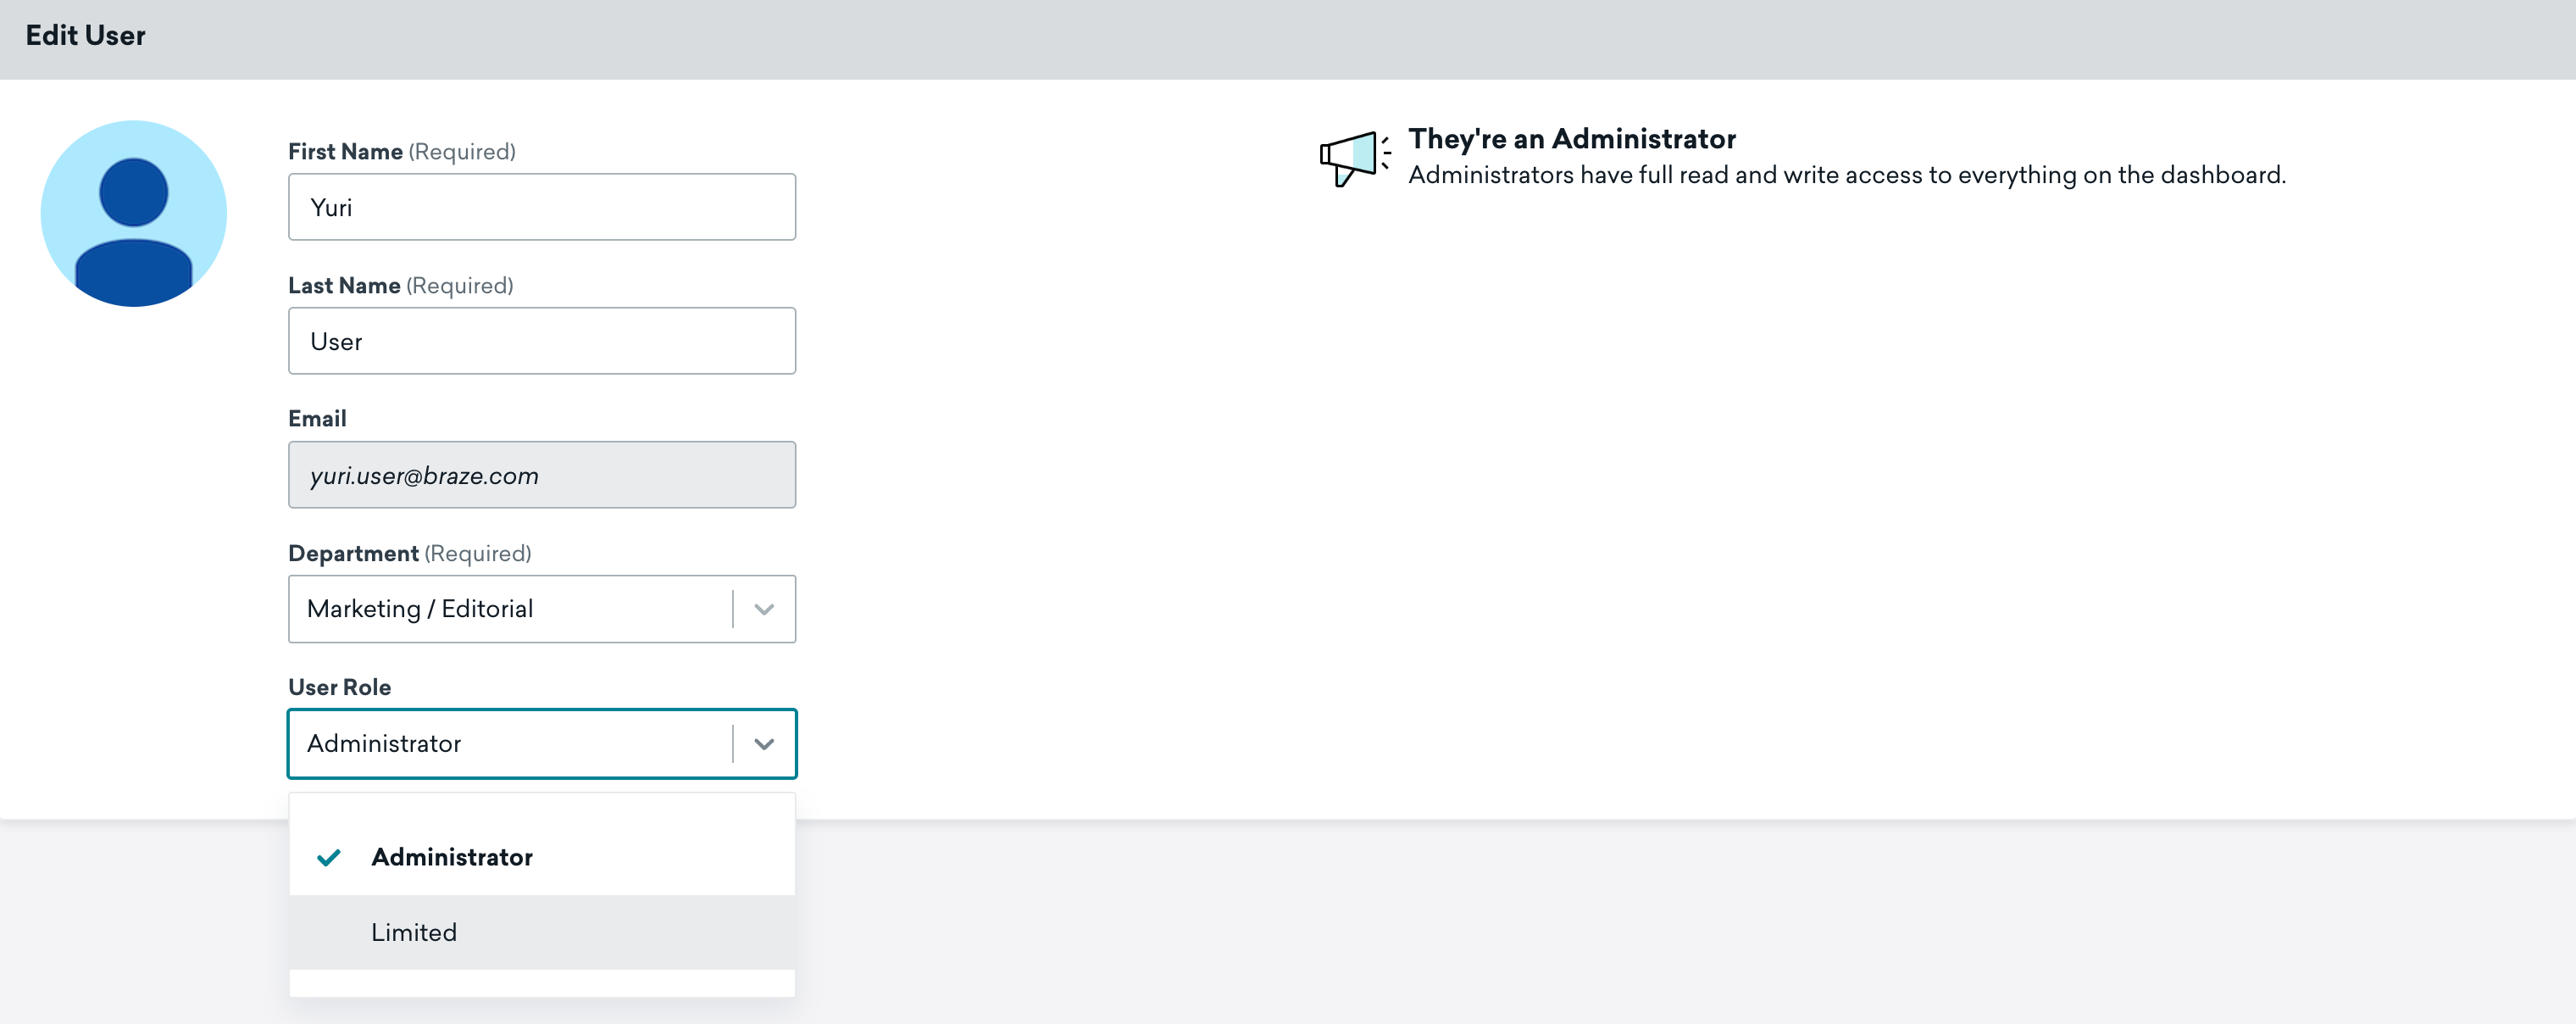 Selecting Administrator or Limited when editing a user